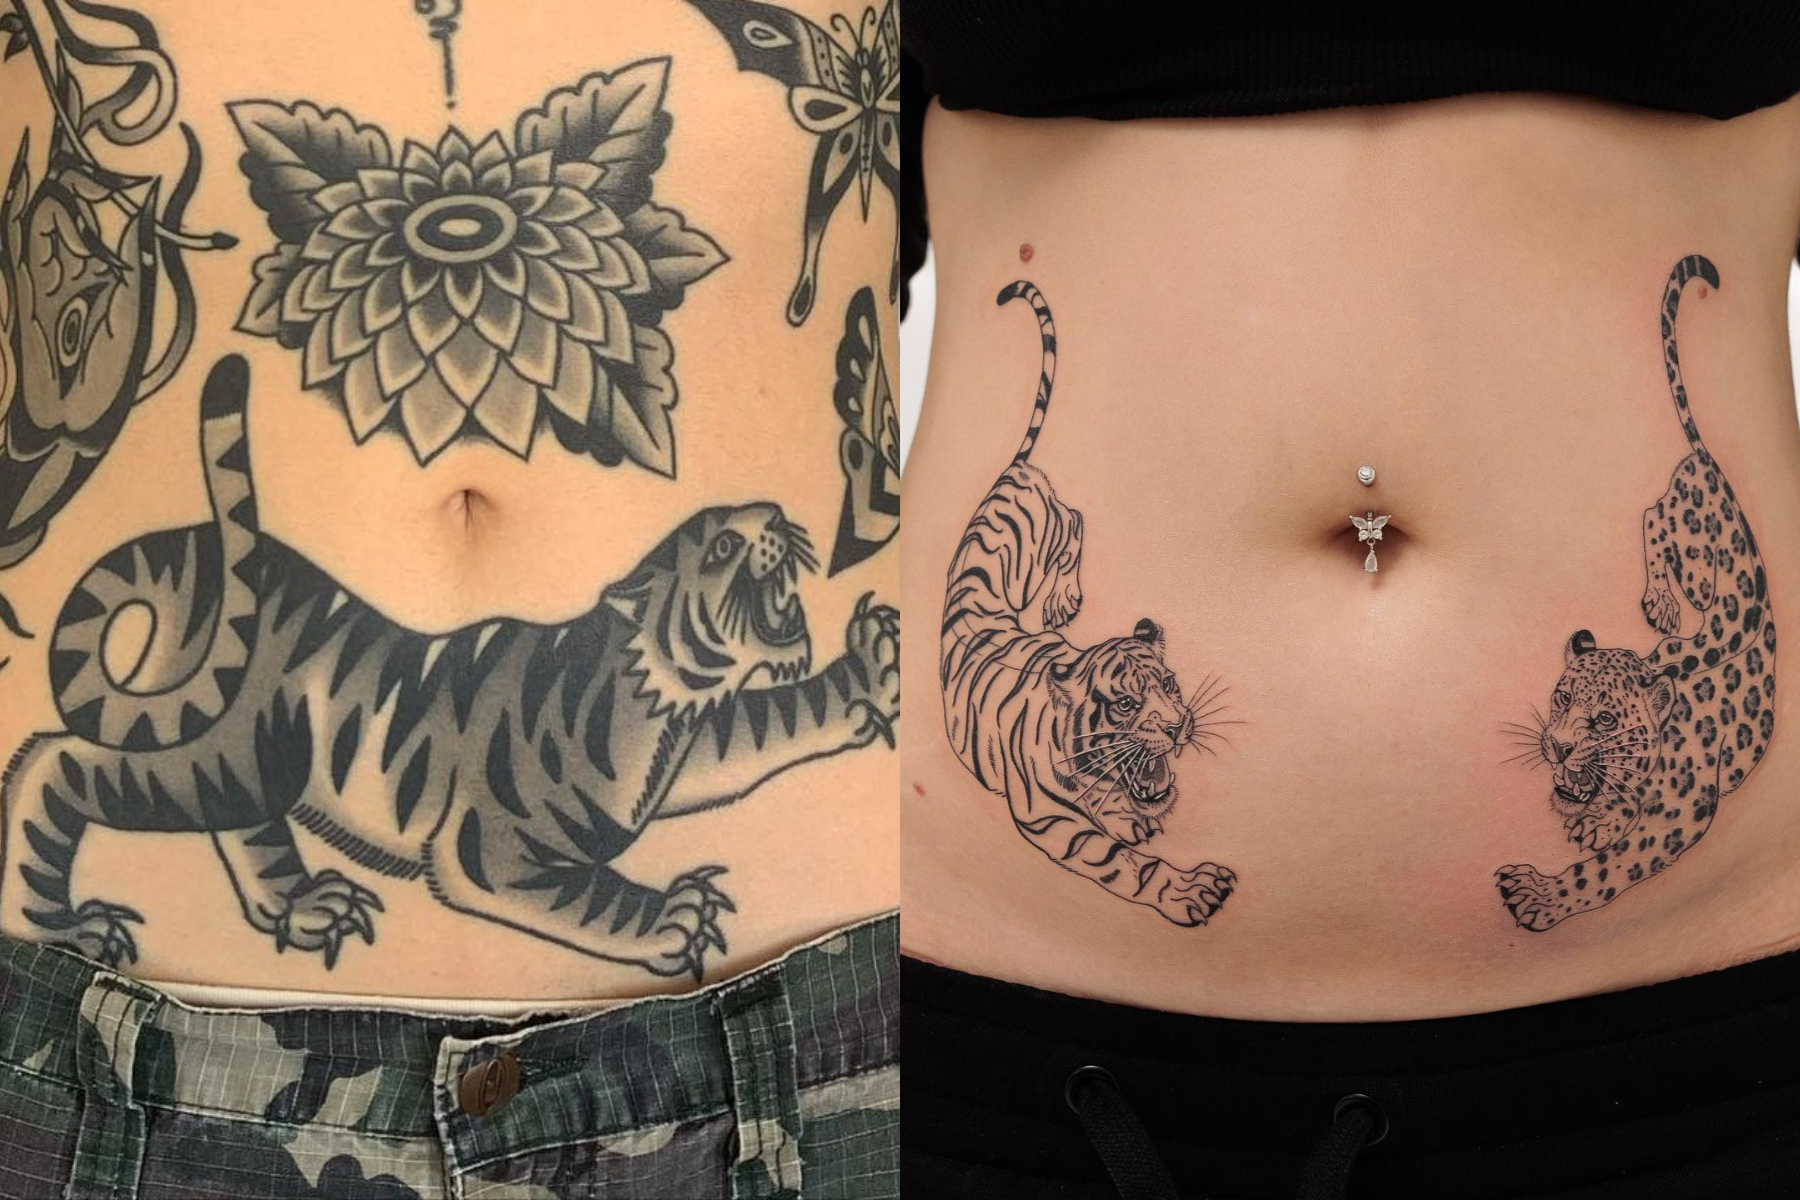 What are some good designs for side stomach tattoos? - Quora